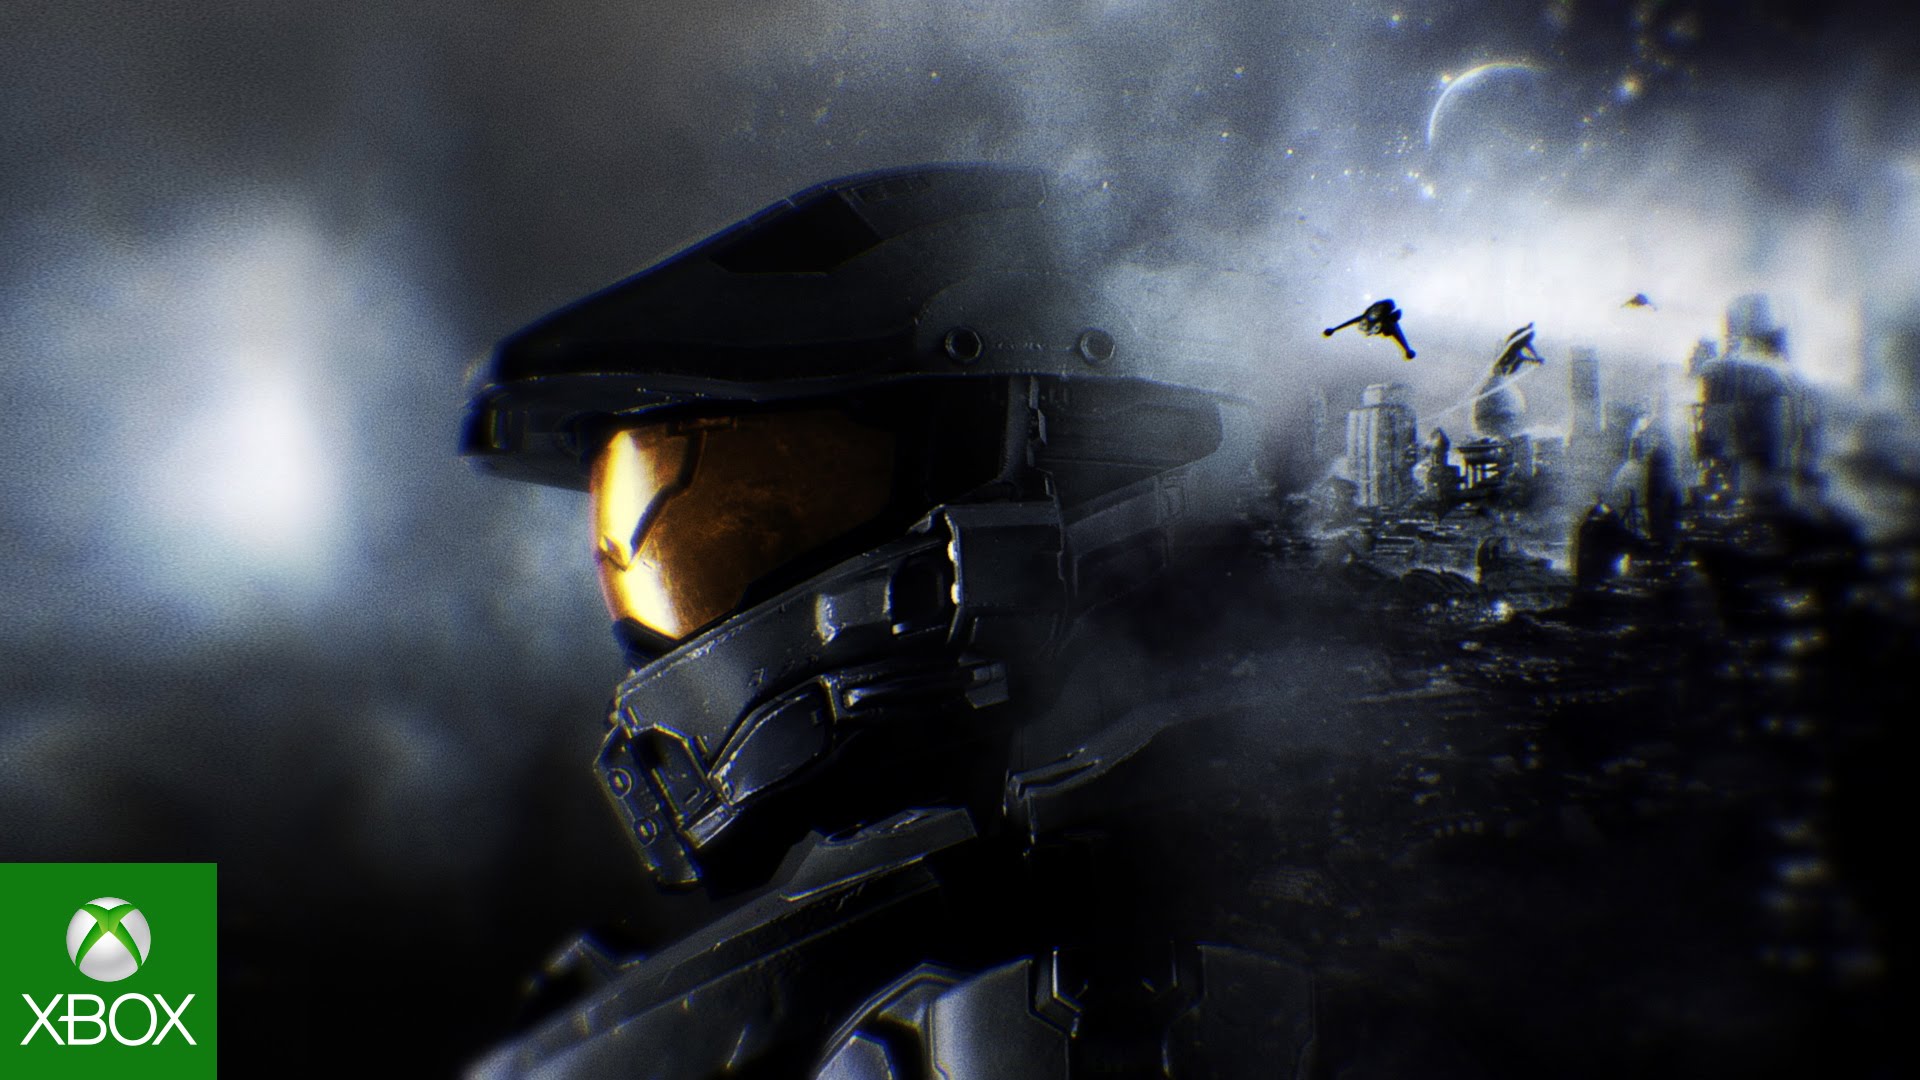 Ready for More Epic Adventures? The Halo Series is the Perfect